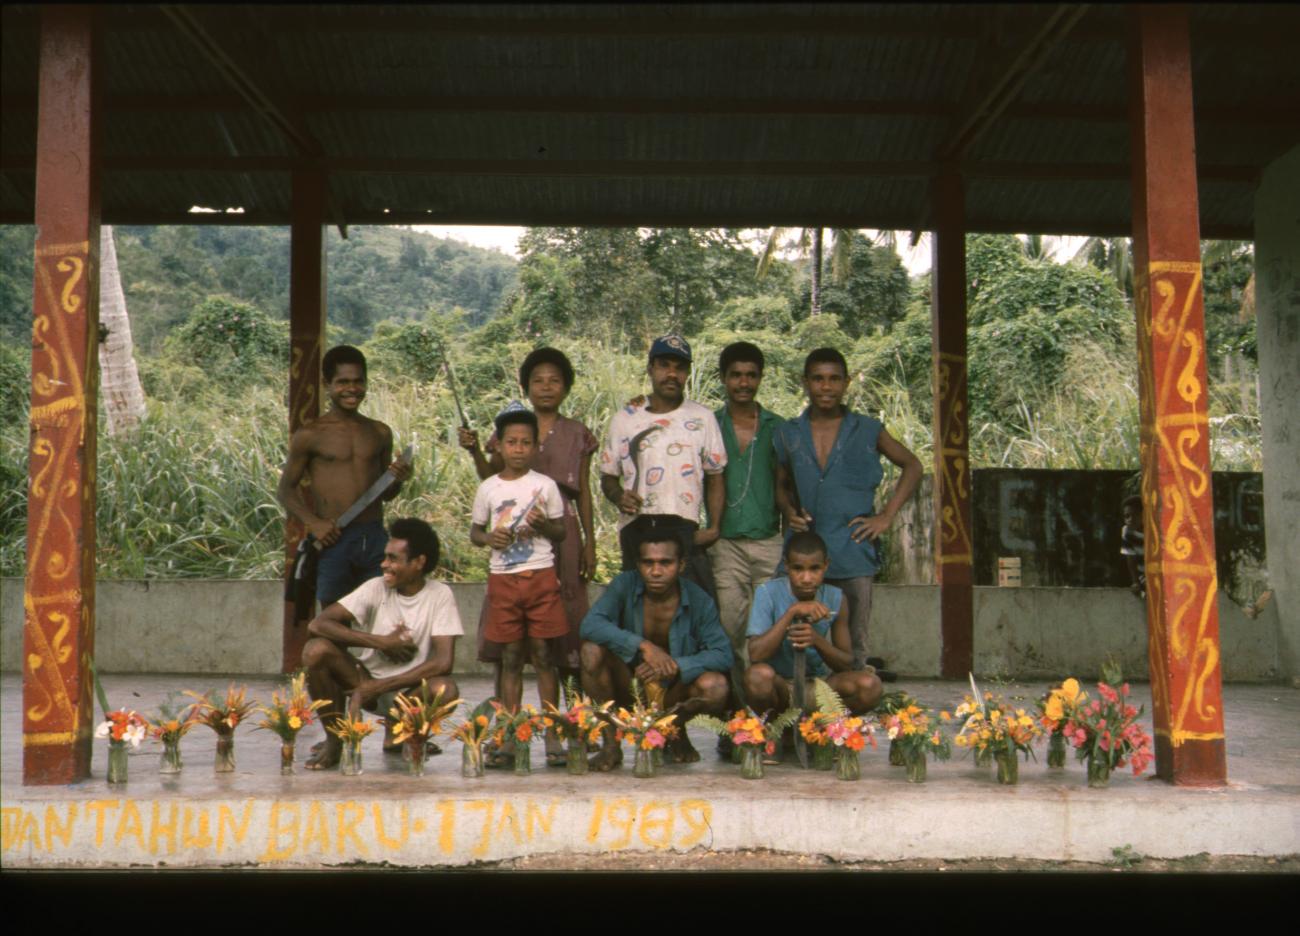 BD/166/368 - 
Papua people with flower vases
